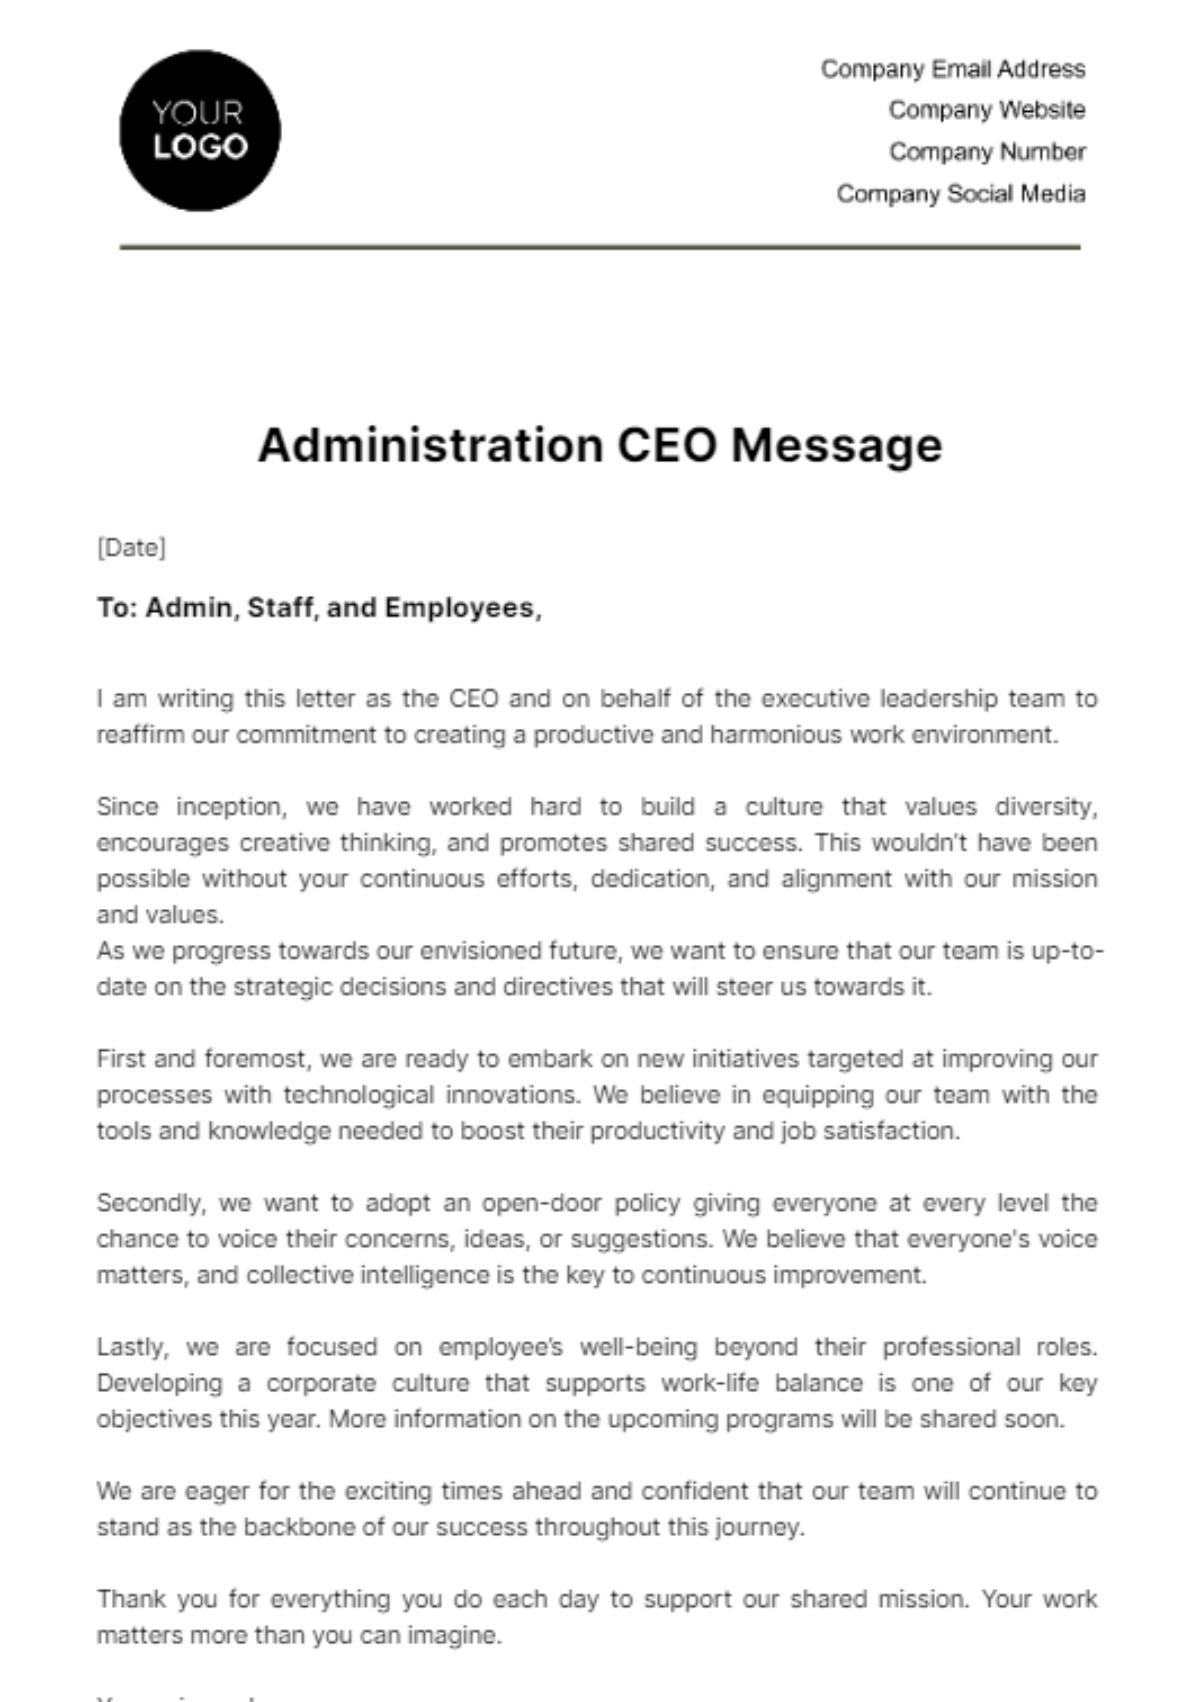 Free Administration CEO Message Template